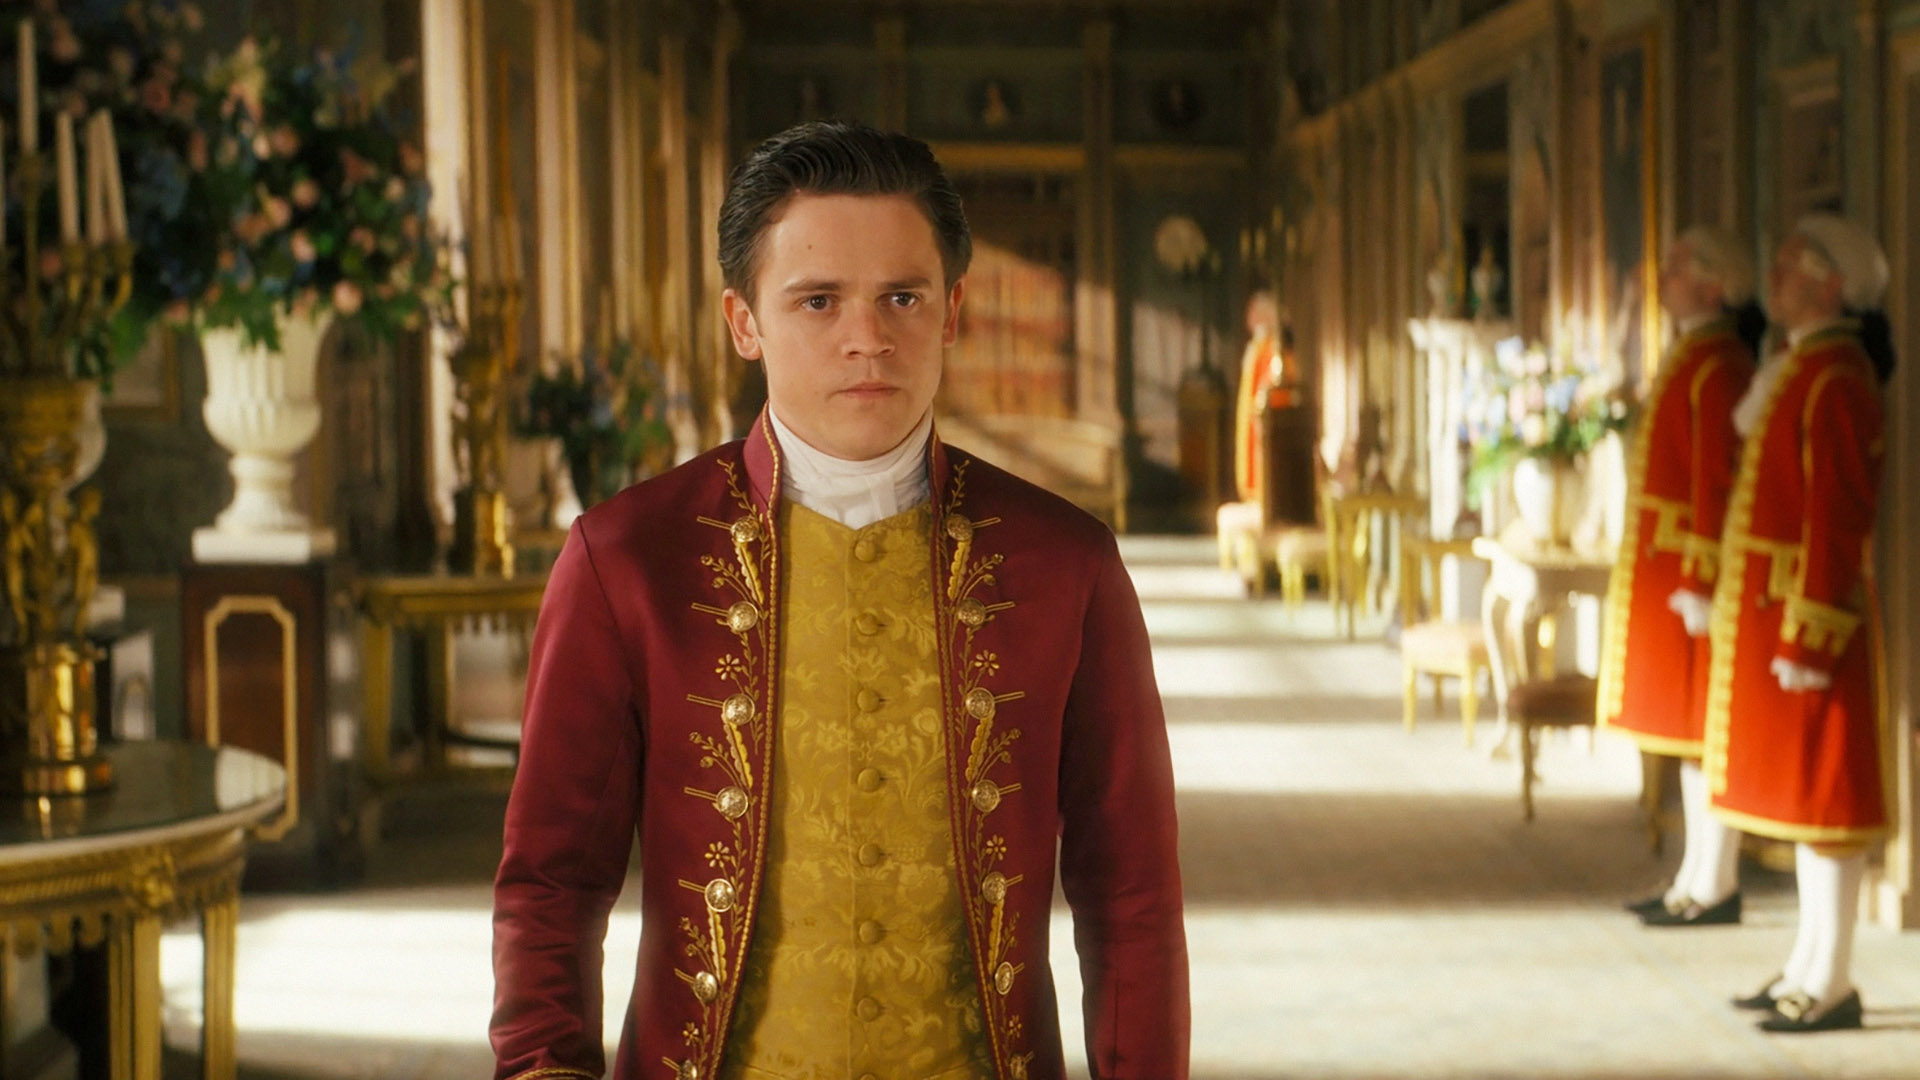 Sam Clemmett plays the role of young Brimsley in 'Queen Charlotte: A Bridgeton Story'